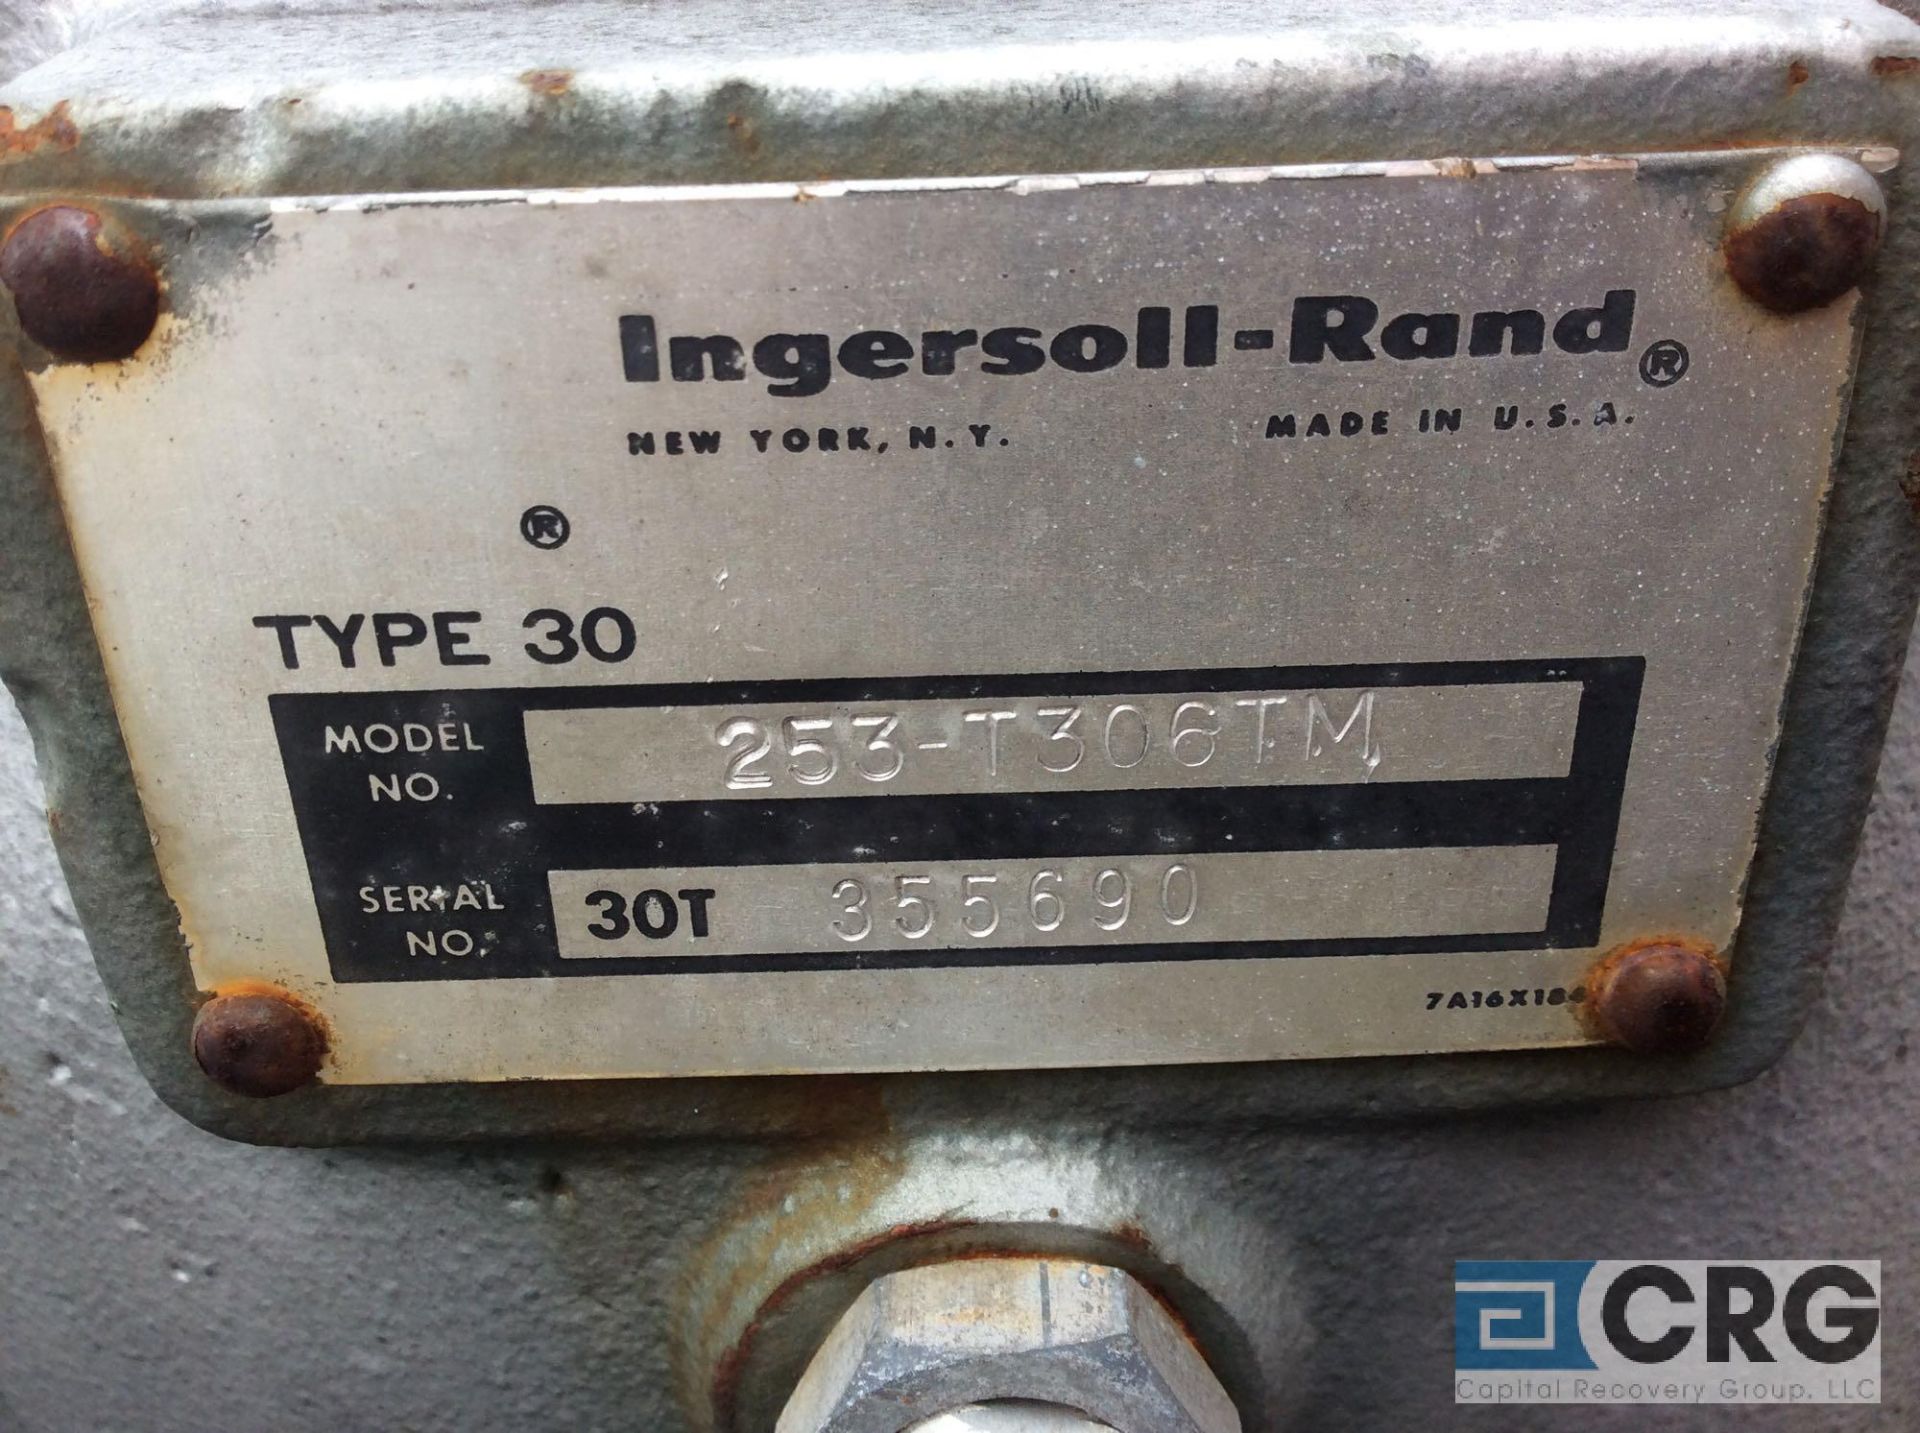 ingersoll Rand horizontal air compressor, mn 255-T306TM (LOCATED GARFIELD ST) - Image 2 of 2